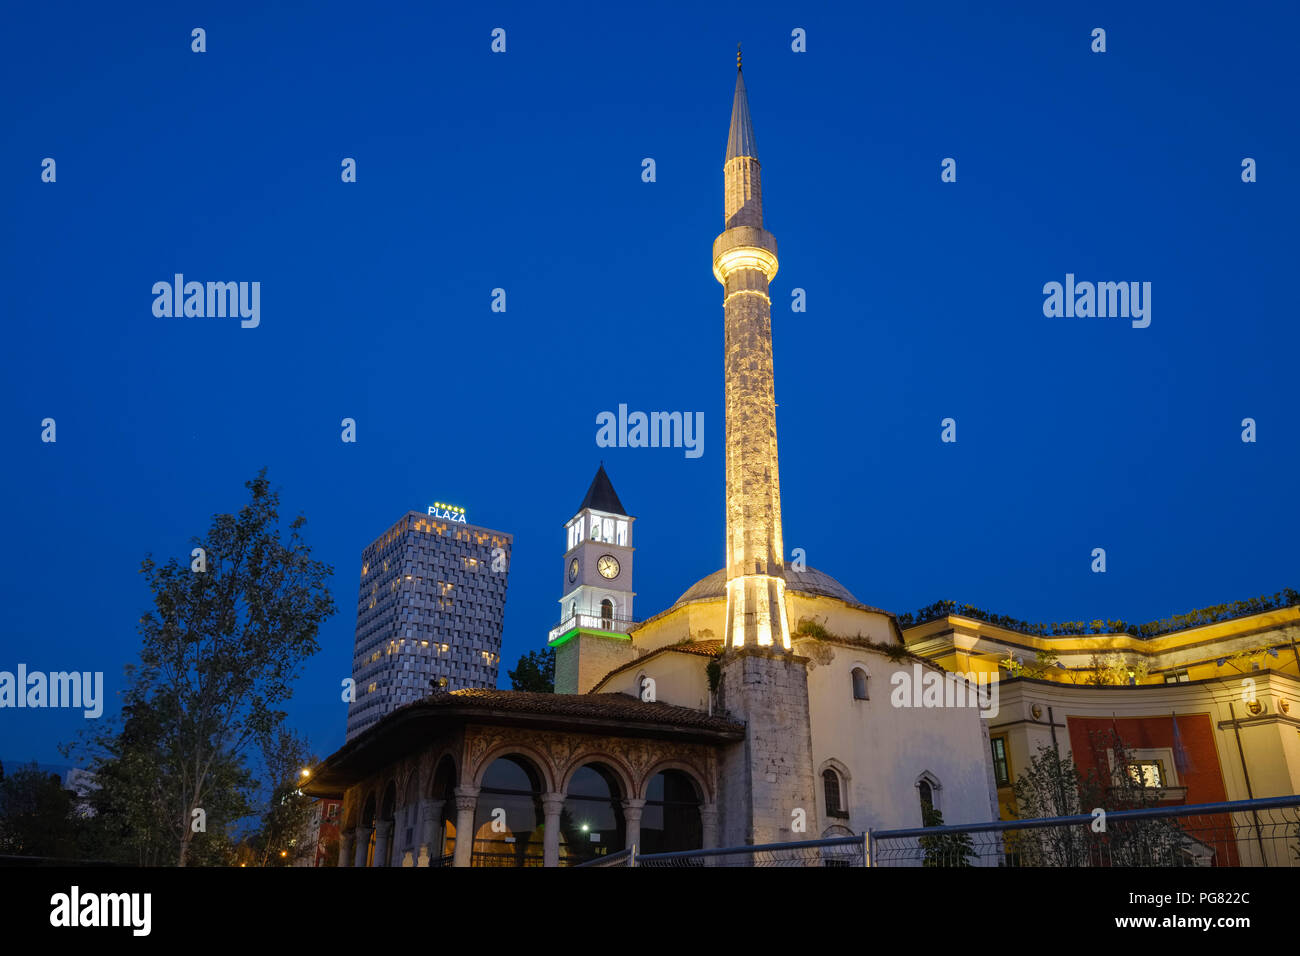 Albania, Tirana, Et'hem Bey Mosque, Clock Tower and TID Tower at blue hour Stock Photo